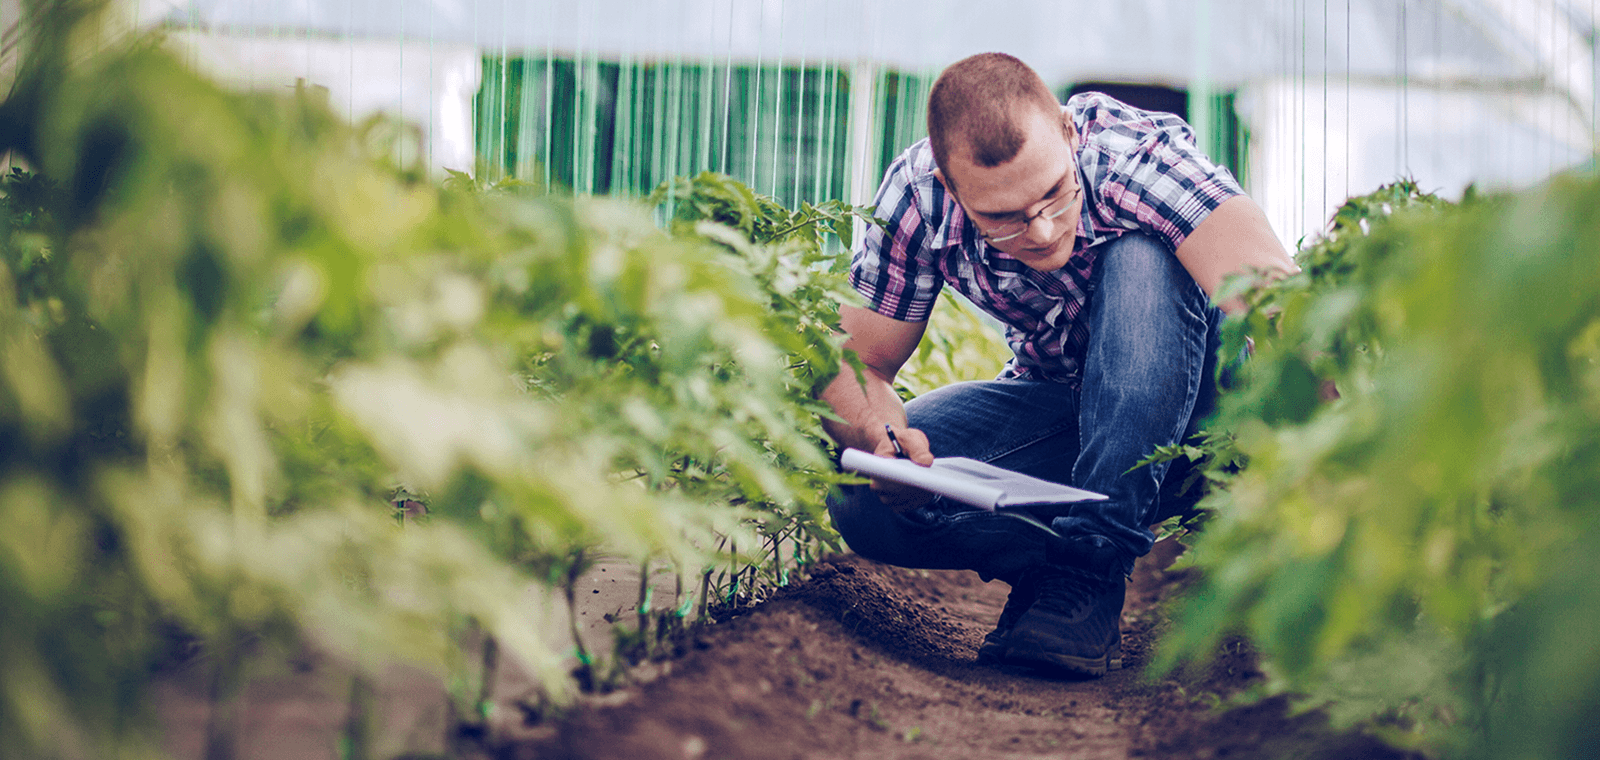 An agronomist with a clip-board crouches under a polytunnel, reviewing two rows of small green plants.